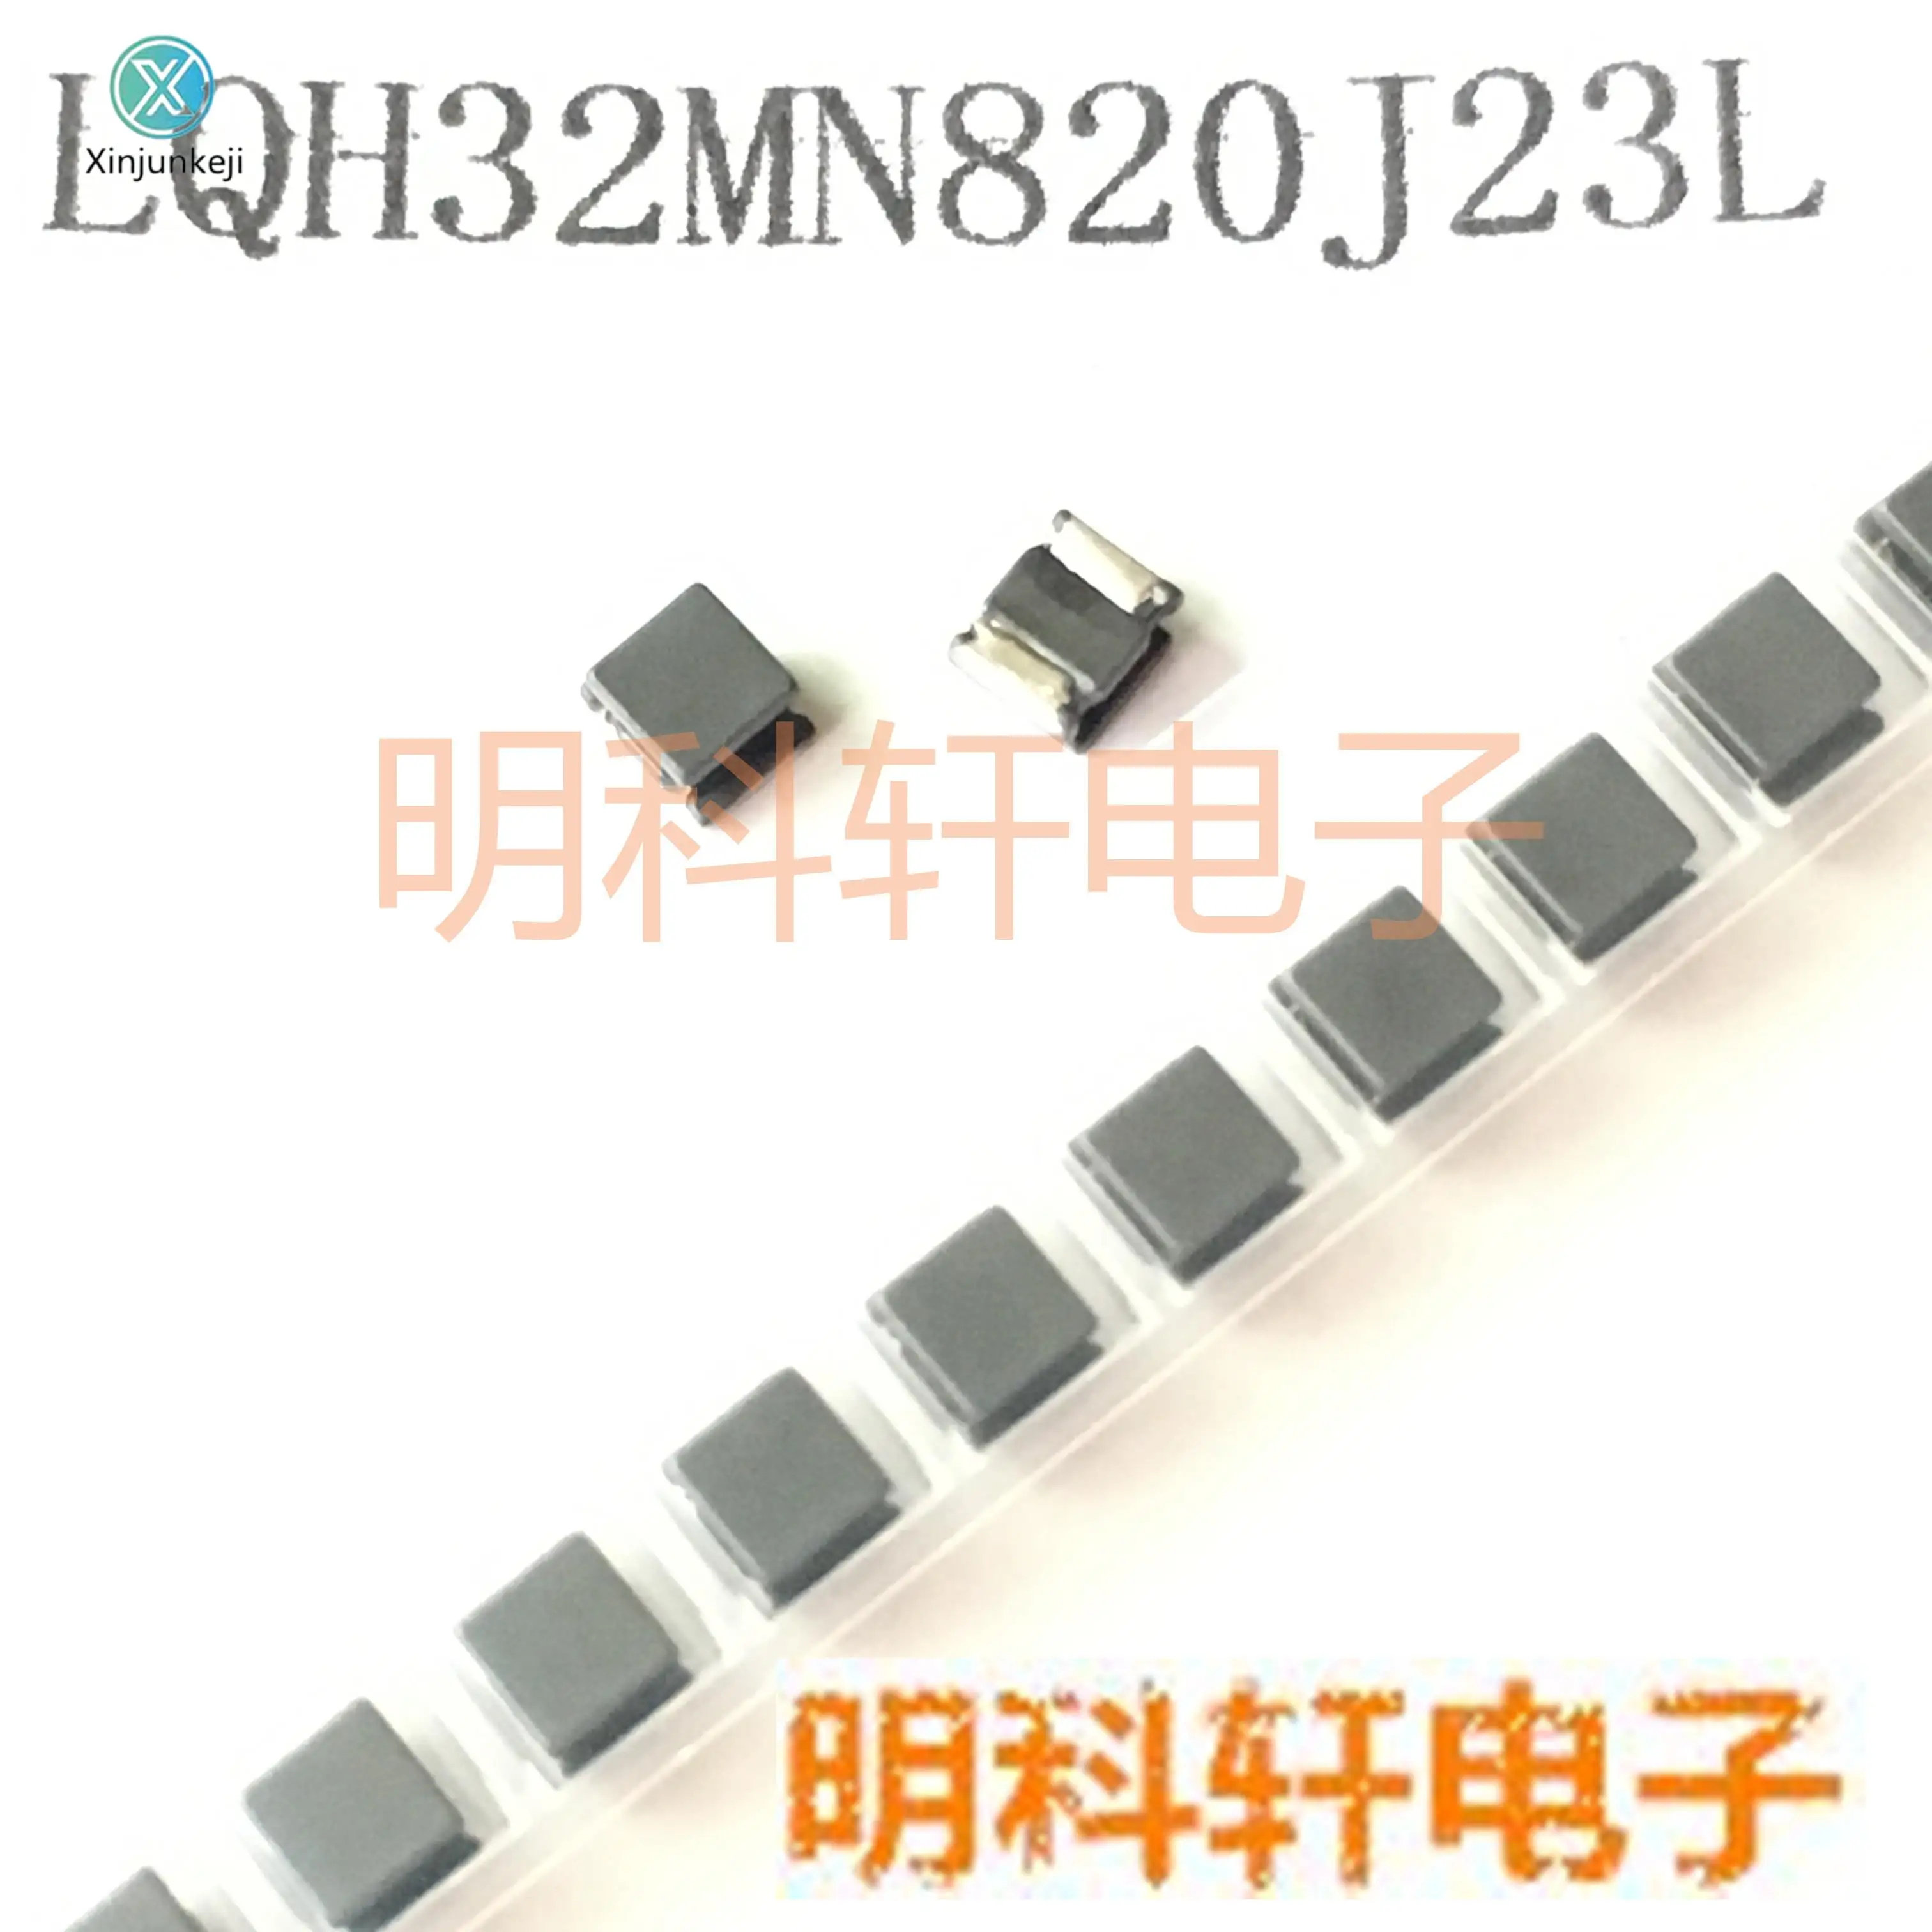 

30pcs orginal new LQH32MN820J23L SMD I-shaped wire wound inductor 1210 3225 82UH 5% 70mA